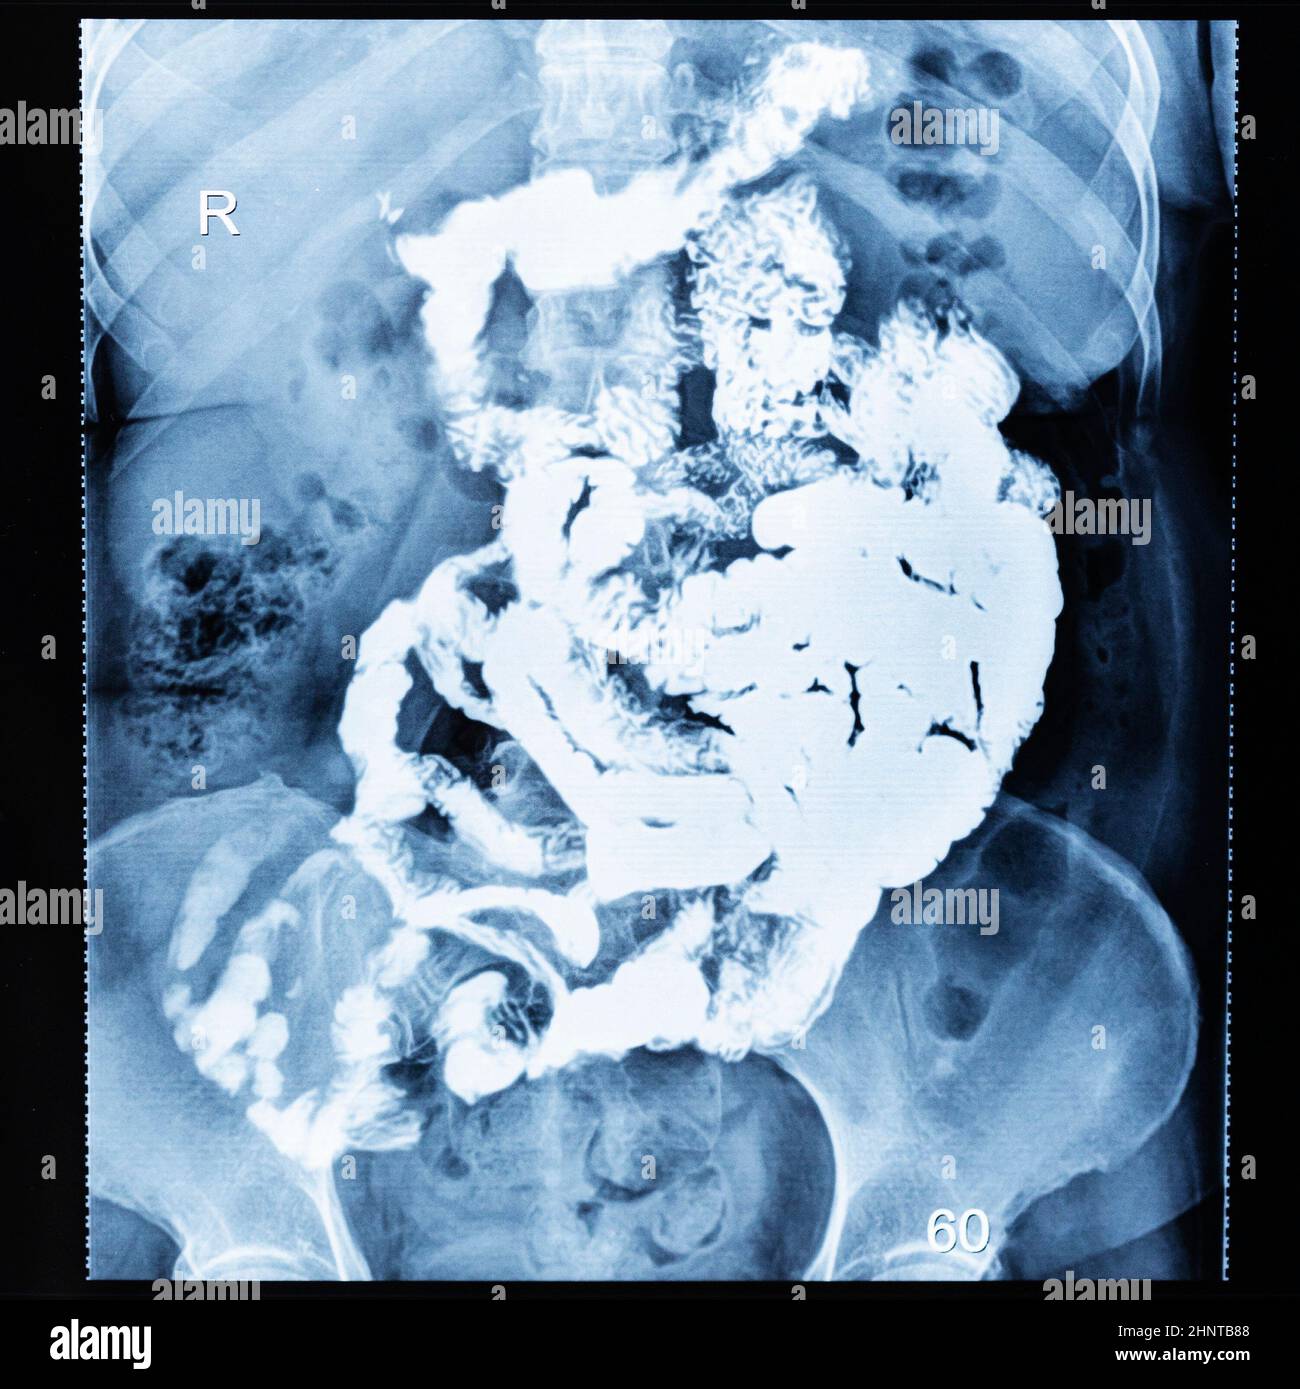 Barium study of small bowel after sixty minutes Stock Photo